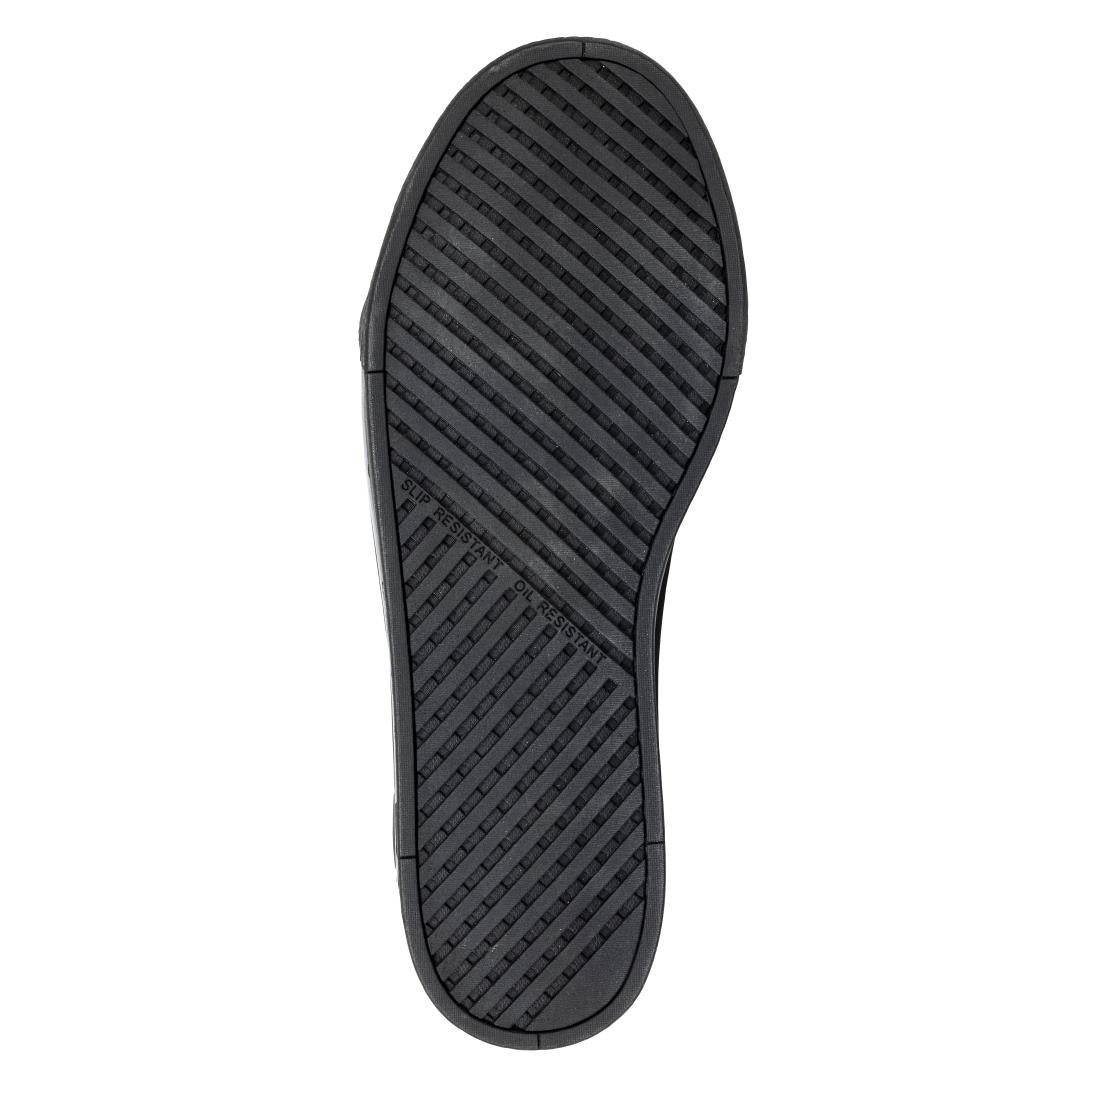 BA060-37 Slipbuster Recycled Microfibre Safety Trainers Matte Black 37 JD Catering Equipment Solutions Ltd